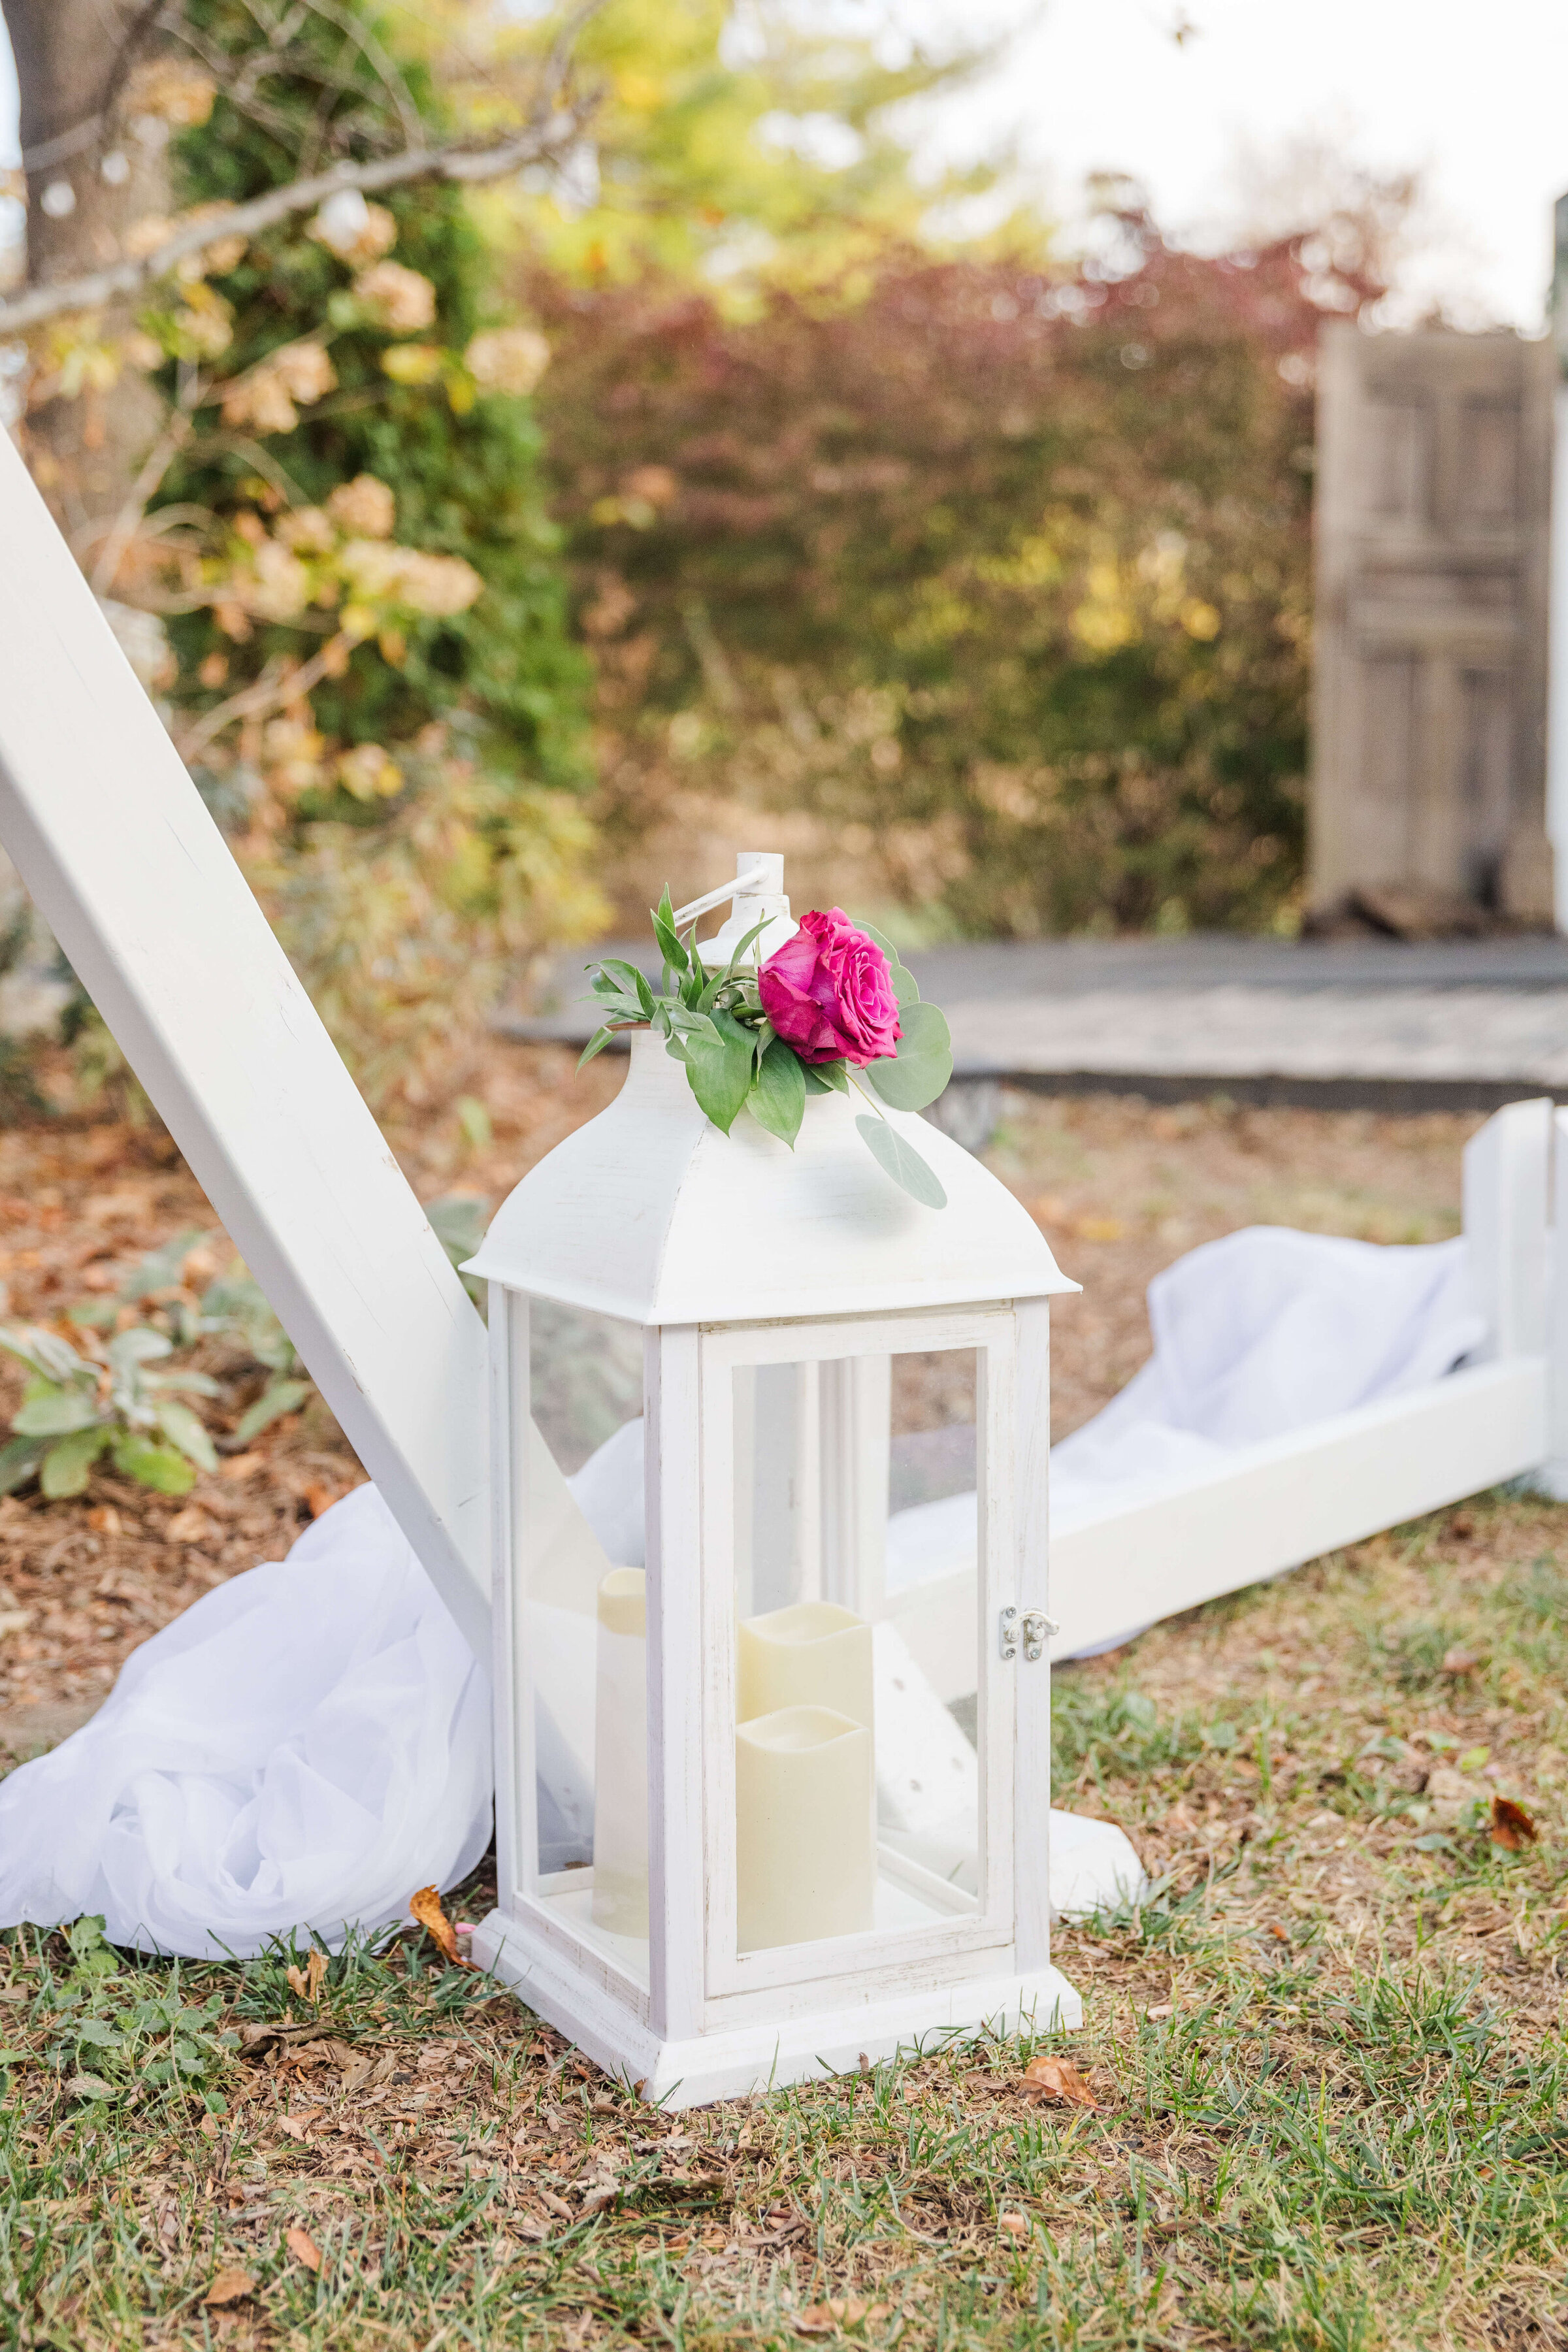 A photo of a white wedding lantern  on the grass by a white arch. The lantern has pink and white roses on top of it